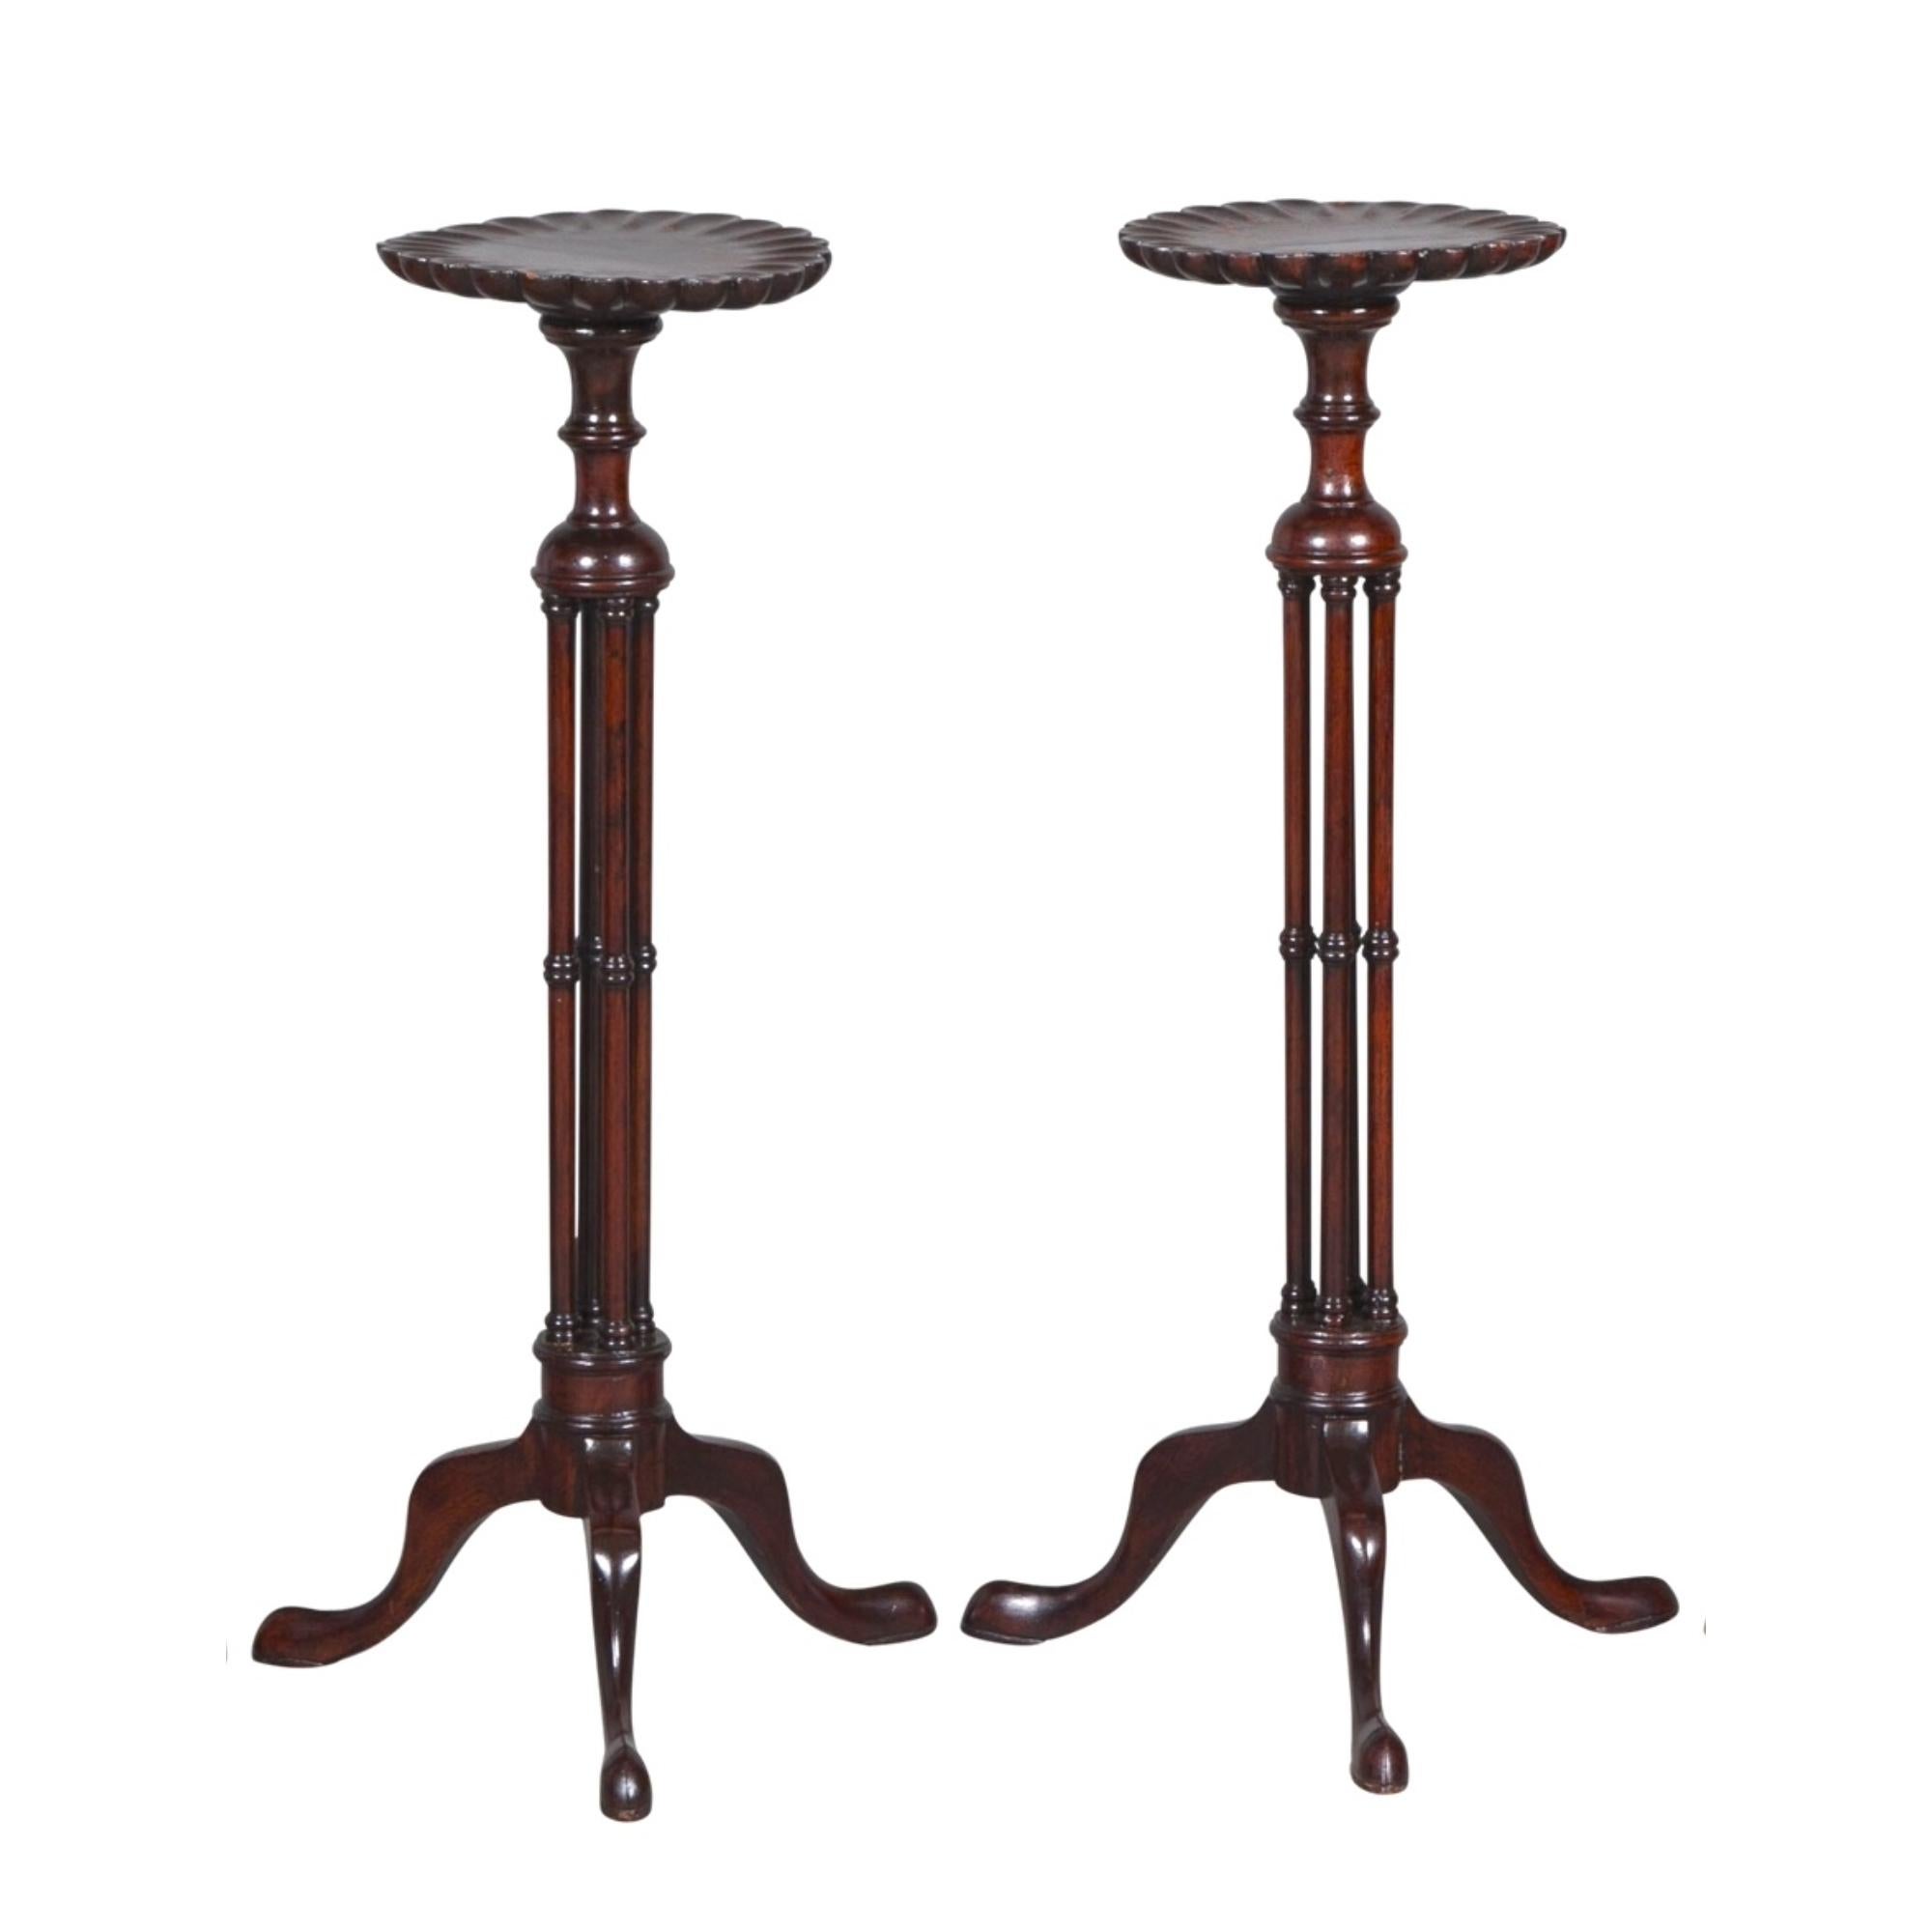 19th Century English Chippendale Style Pair Tripod Foot Candle Stand / Pedestal For Sale 4